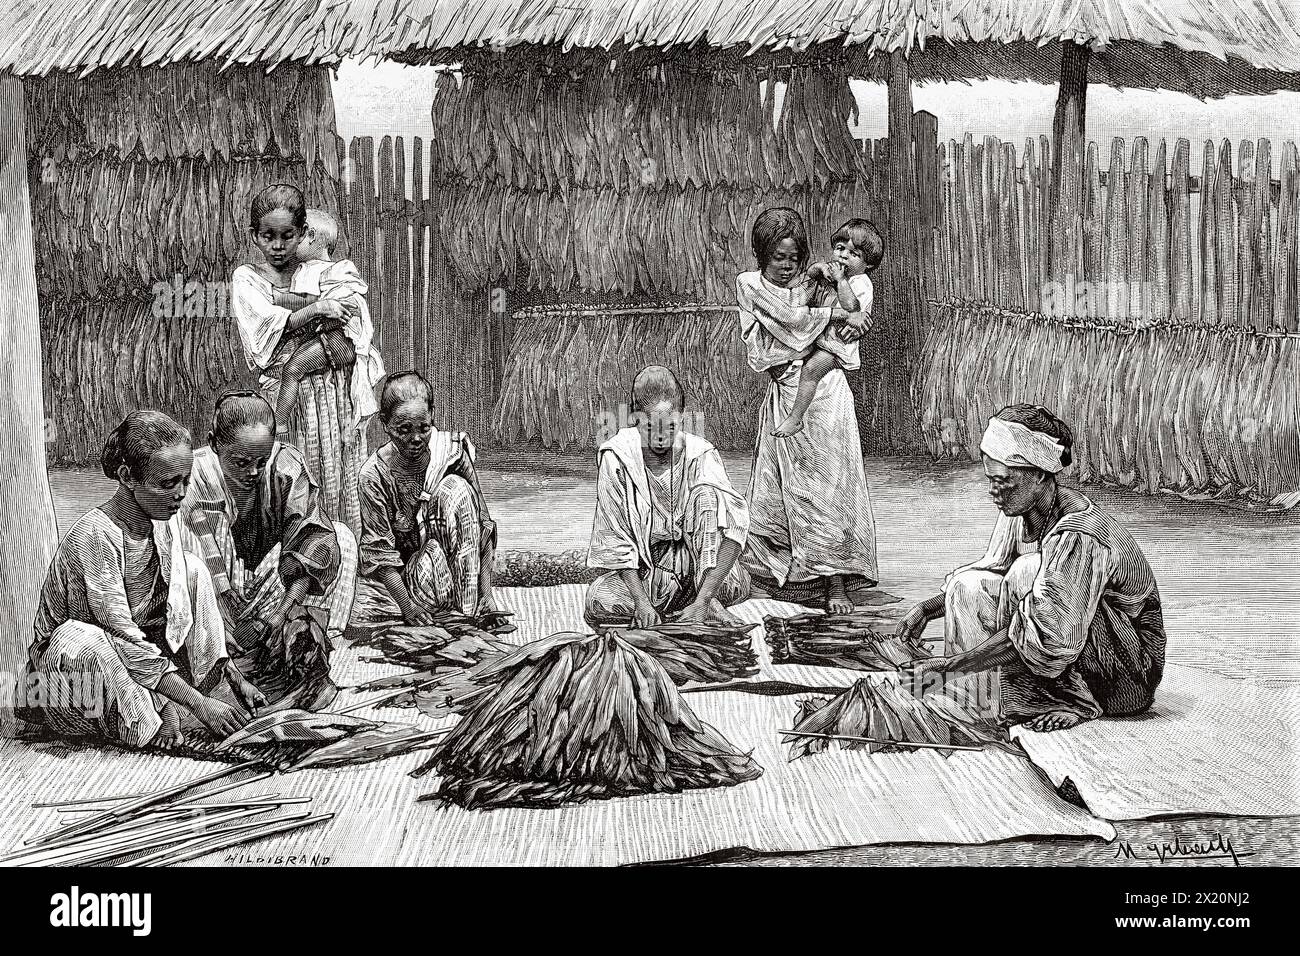 Indigenous natives of the island of Luzon making tobacco, Luzon Island, Philippines, South Asia. Drawing by Murbach. Luzon and Palawan, six years of travel in the Philippines by Alfred Marche (1844-1898) Le Tour du Monde 1886 Stock Photo